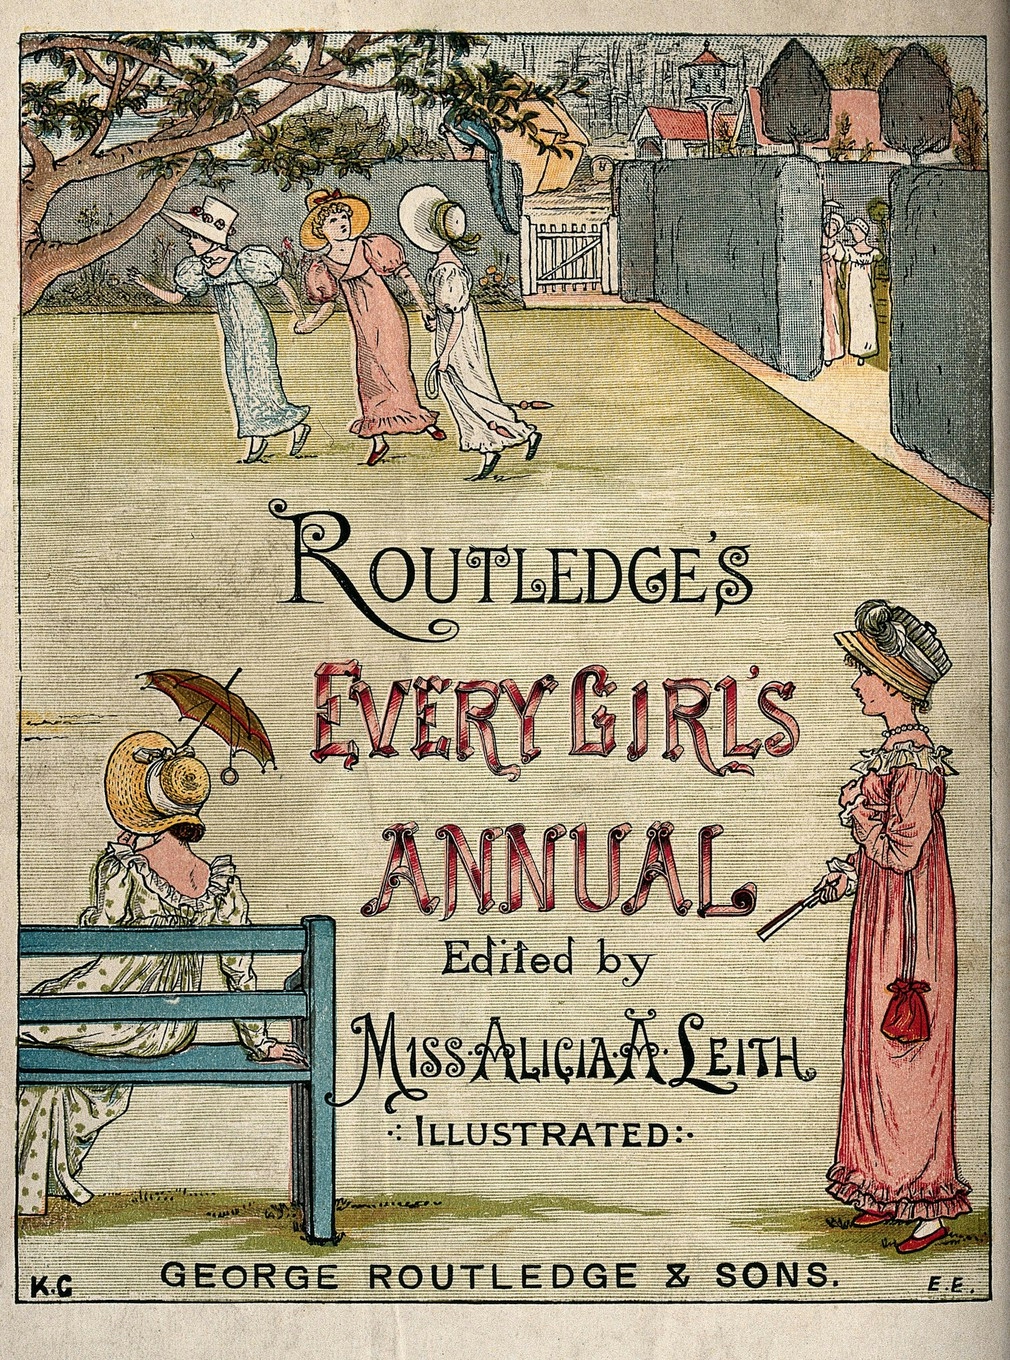 Colour illustration for a book cover with well-dressed young women in a garden